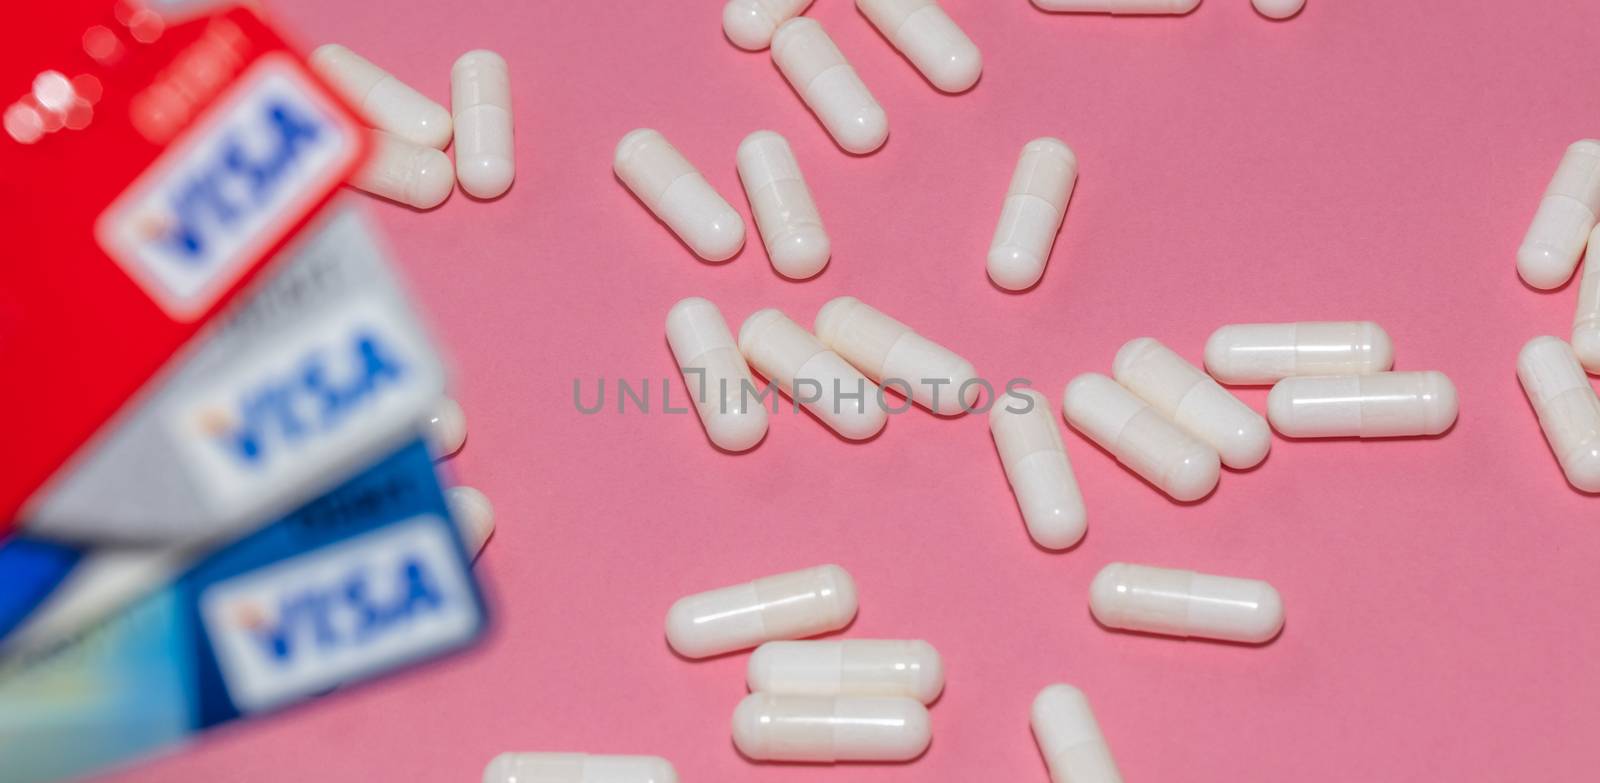 Barnaul, Russia - October 13, 2020: High angle shot of white pills on pink background with three red, silver, blue visa debit cards out of focus in the foreground. Pharmaceutical business concept.